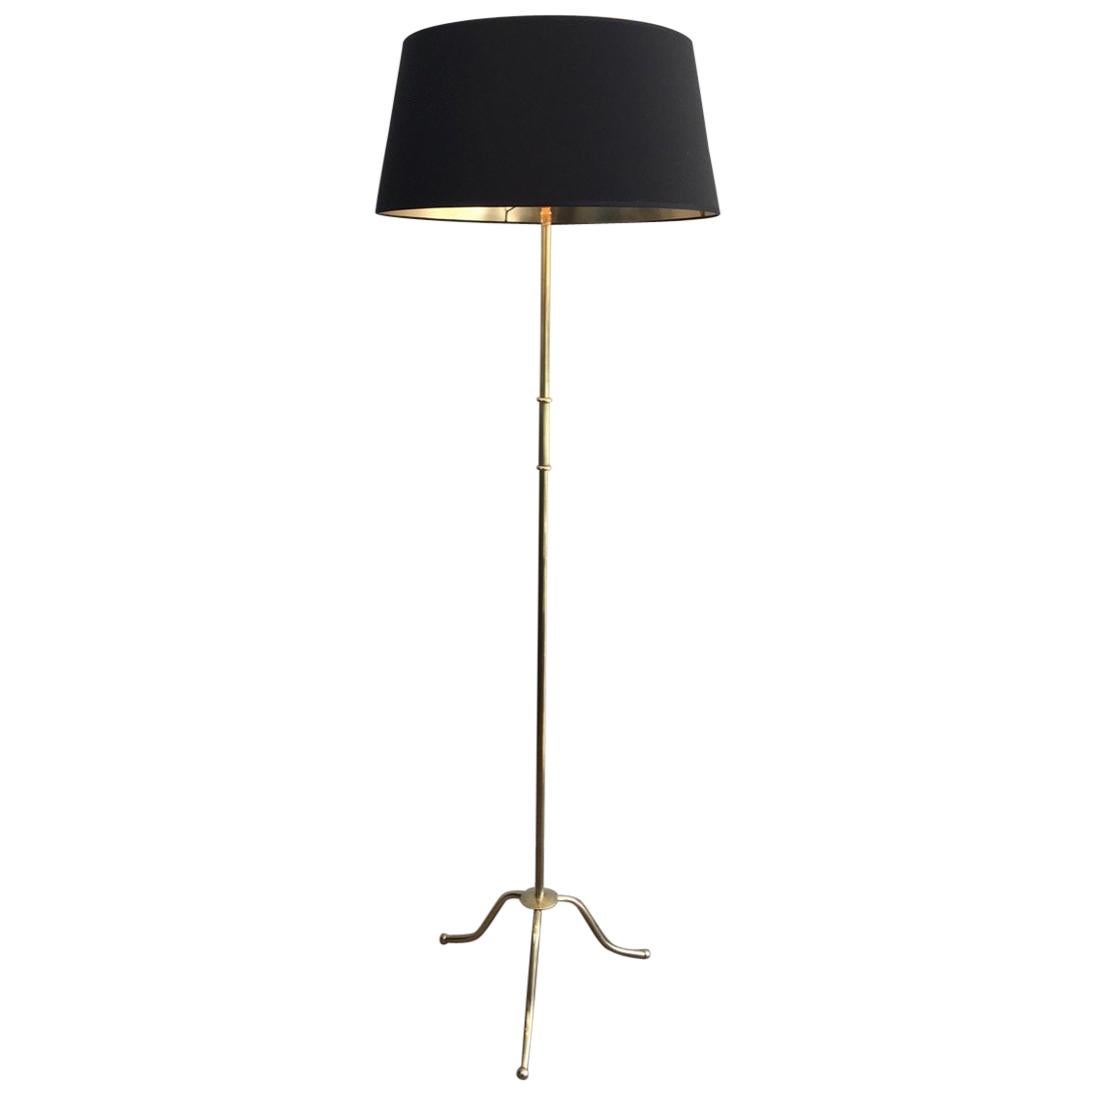 Neoclassical Tripode Brass Floor Lamp with Shade, French, circa 1940